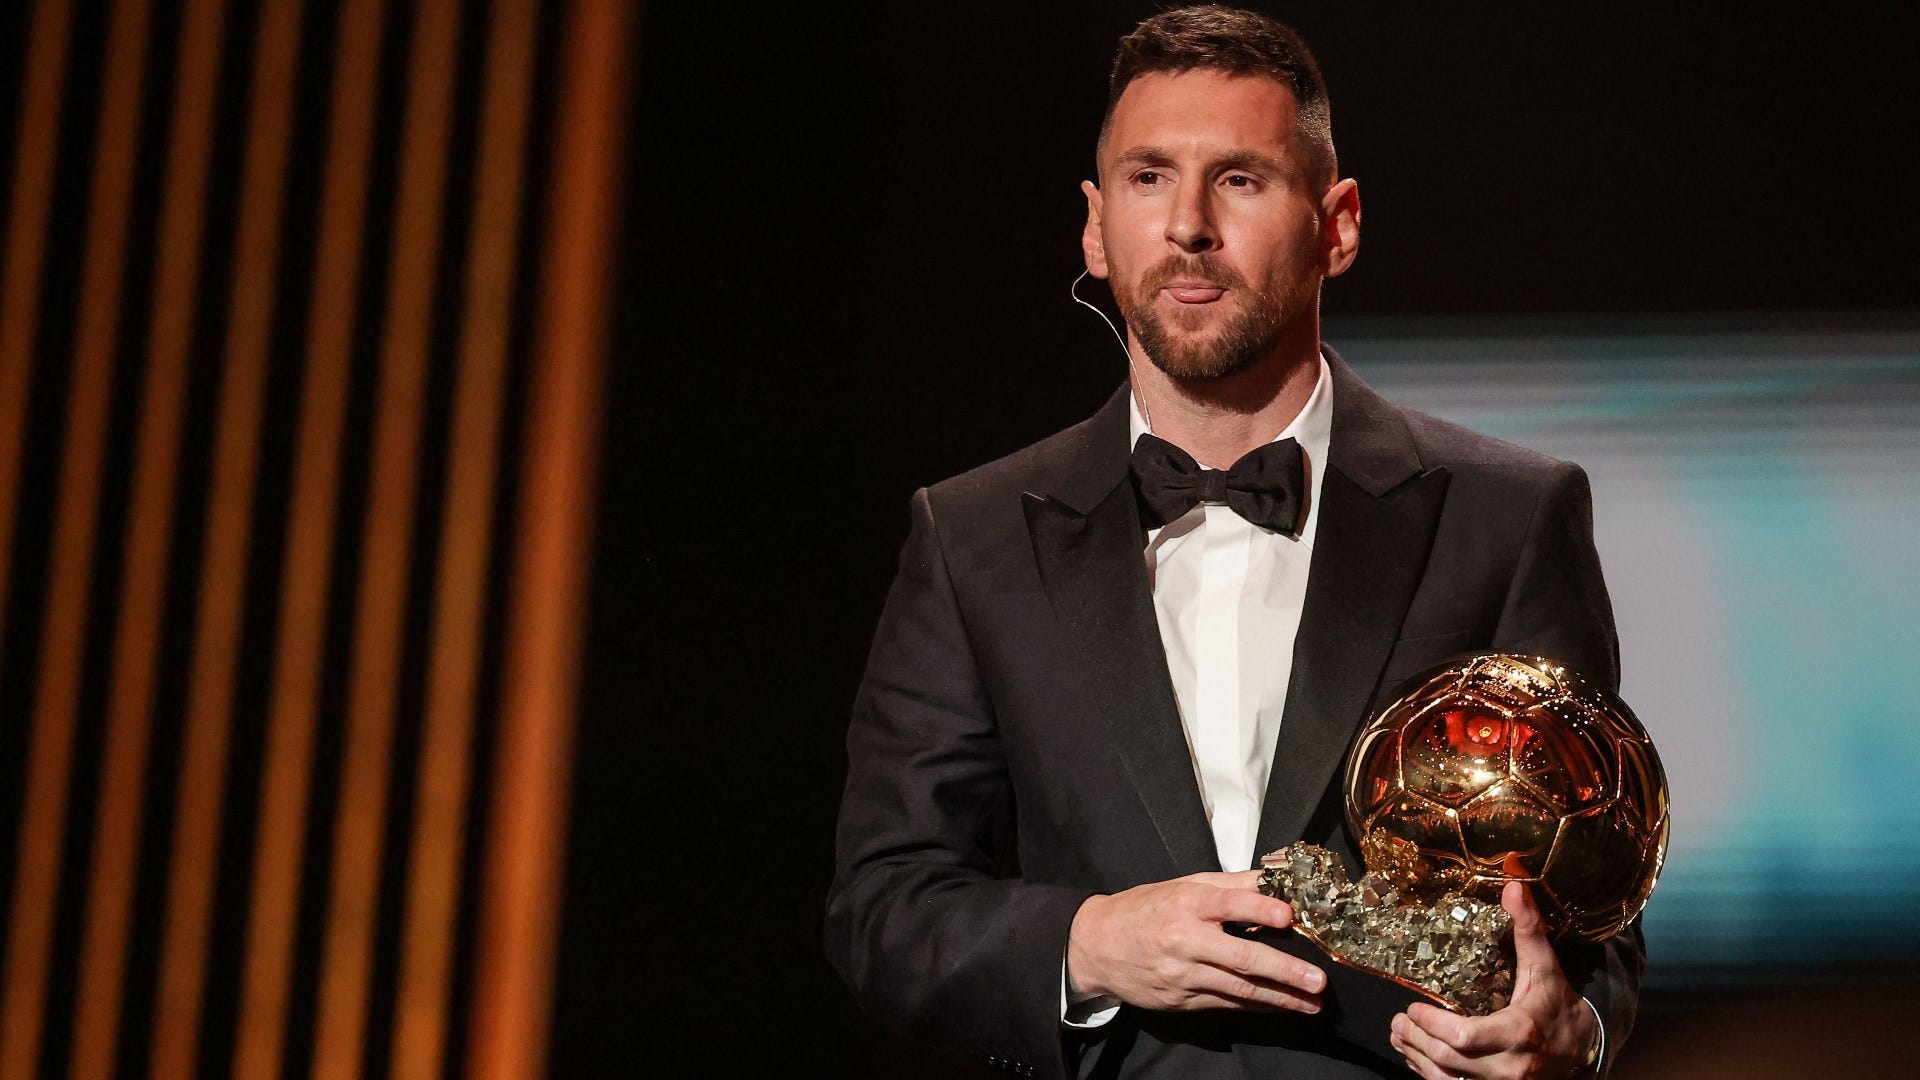 A new era for the Ballon d'Or! UEFA announce partnership with